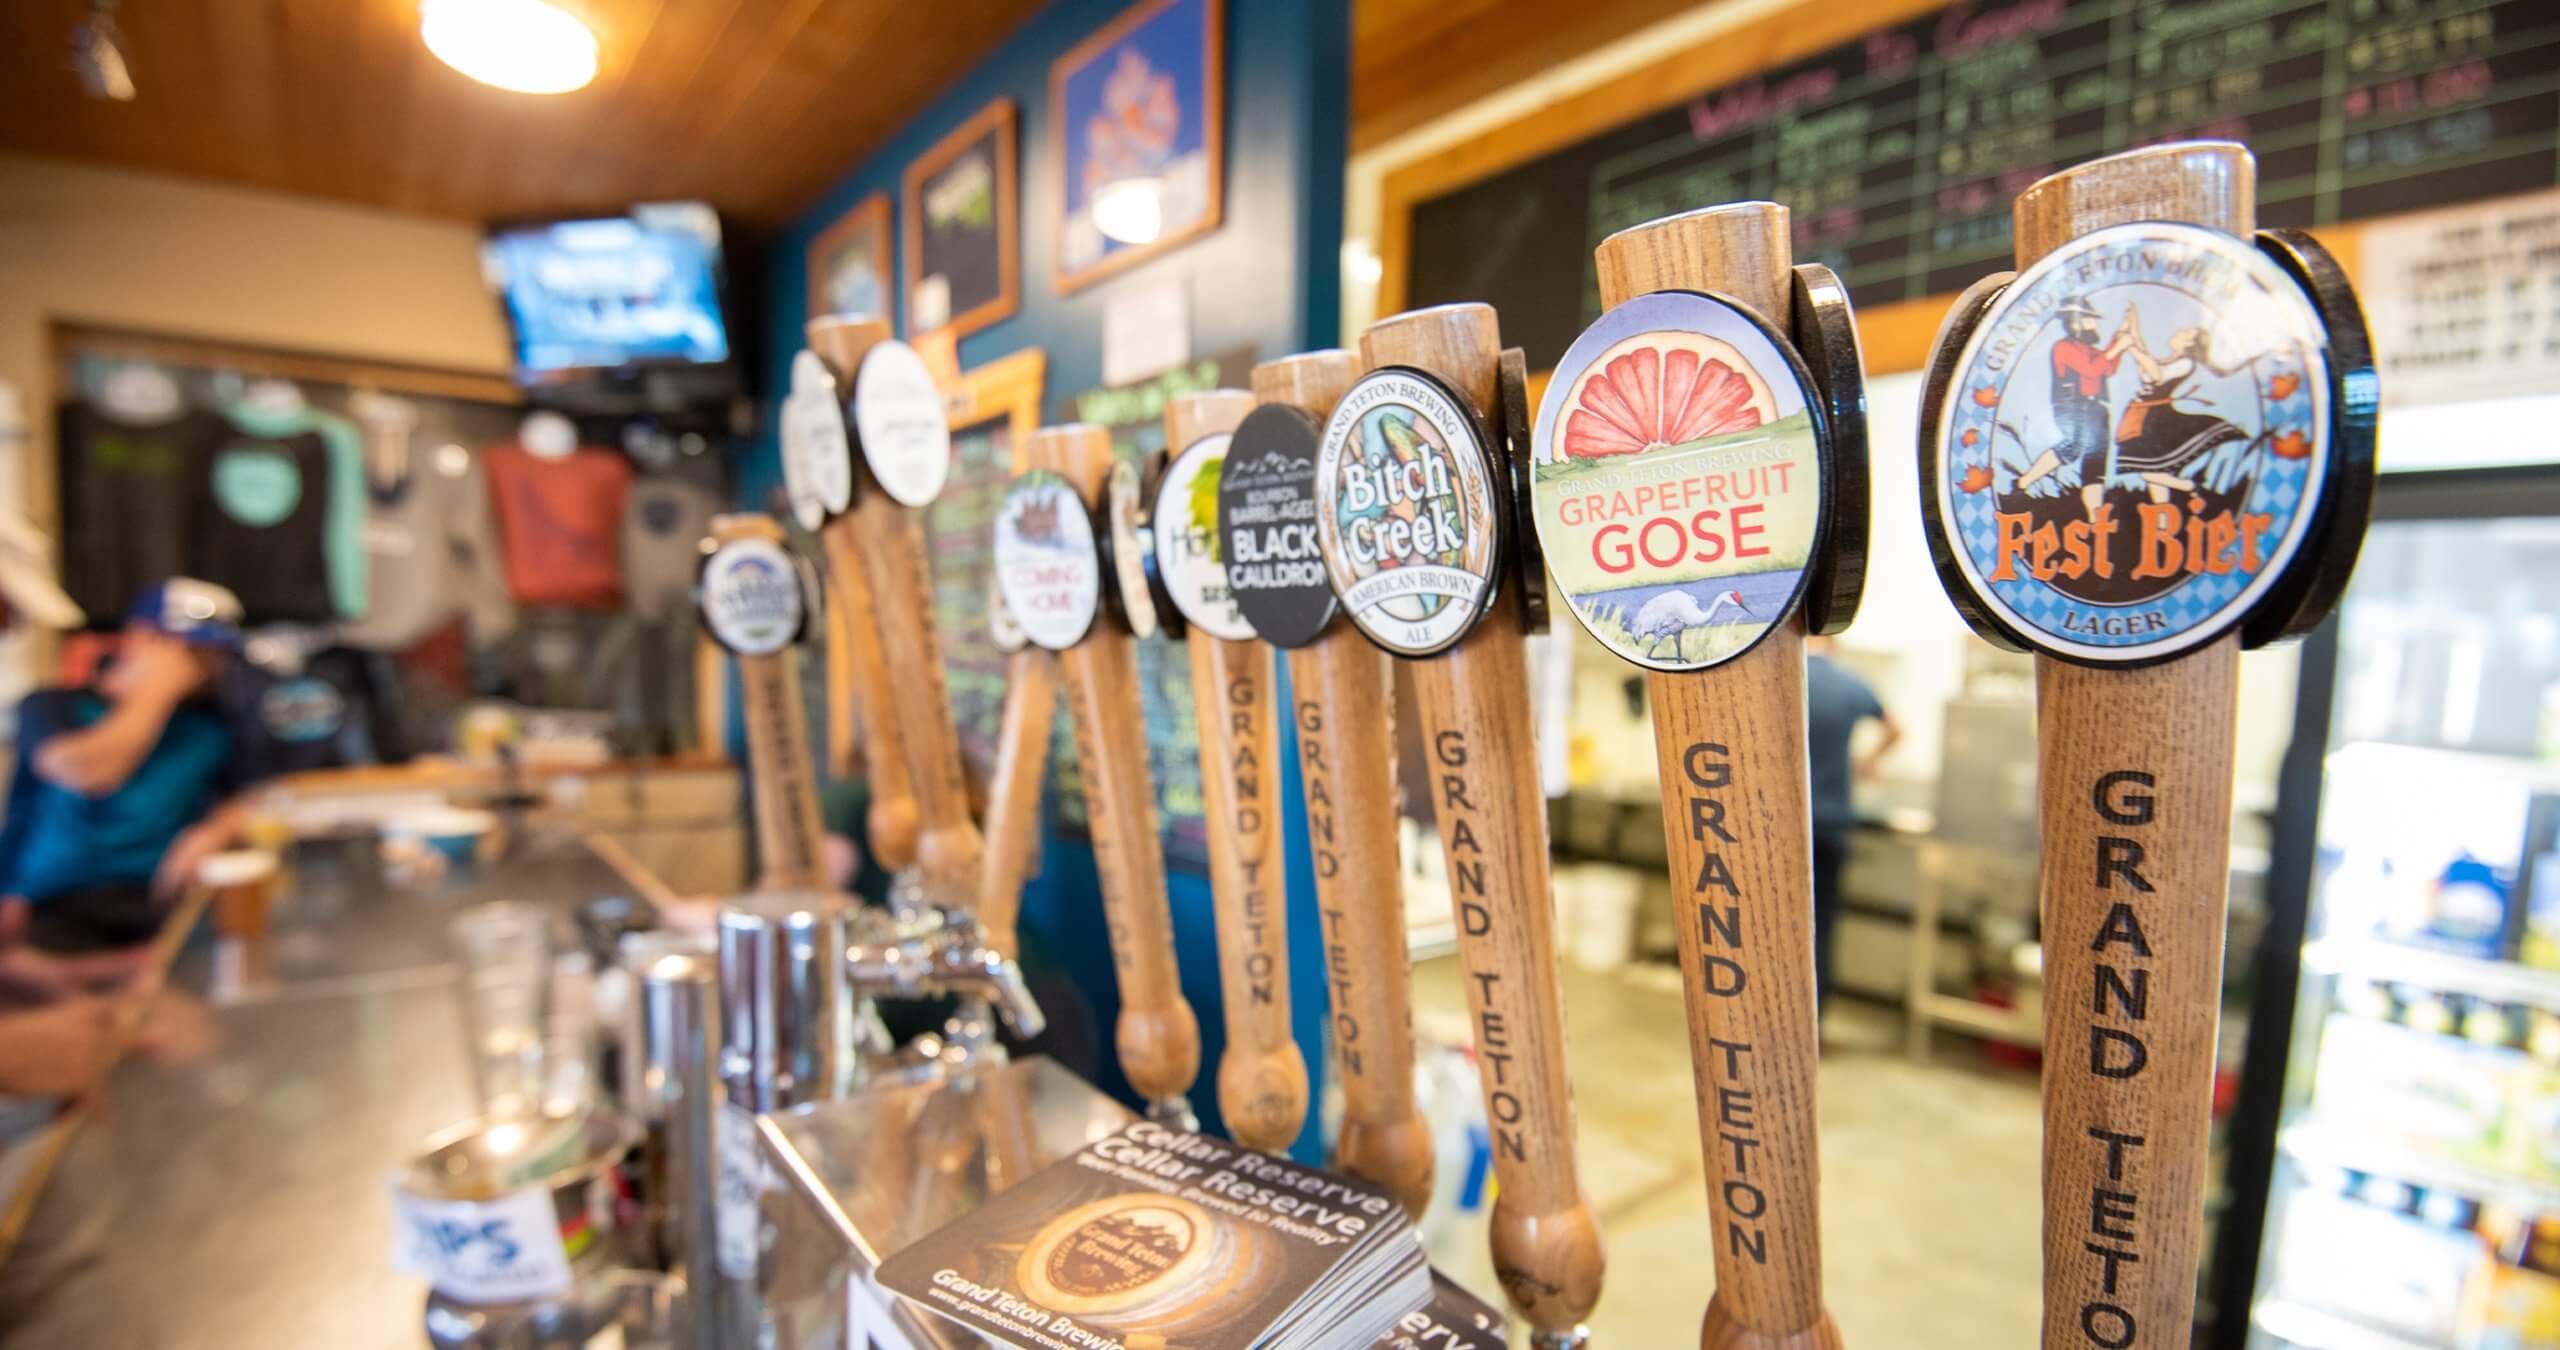 A selection beer tap handles found at Grand Teton Brewing Company.